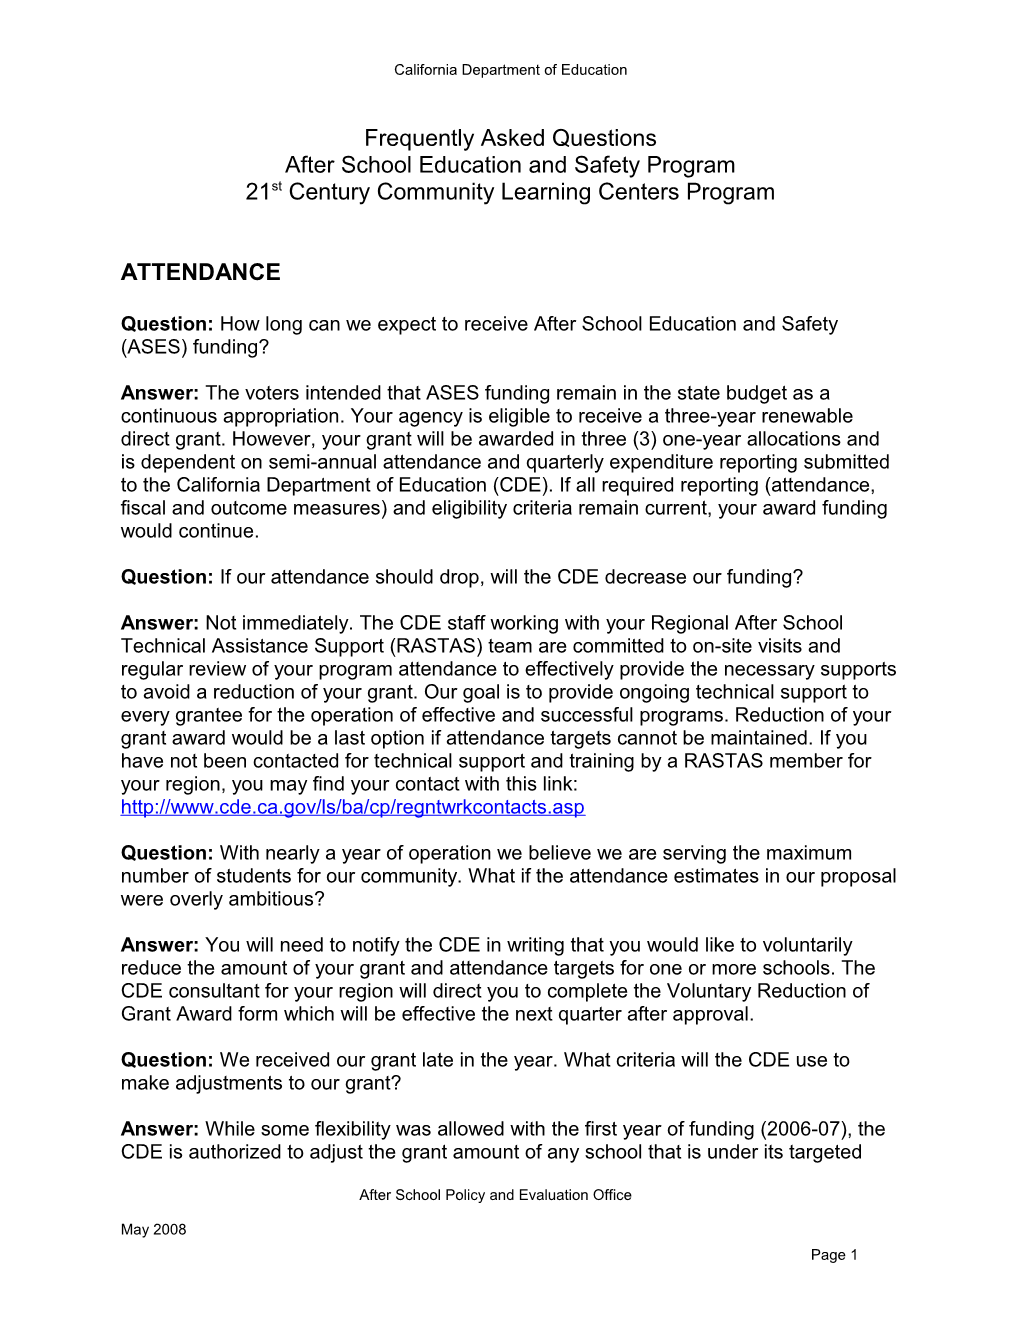 Faqs - 21St Century Community Learning Centers (CA Dept of Education)